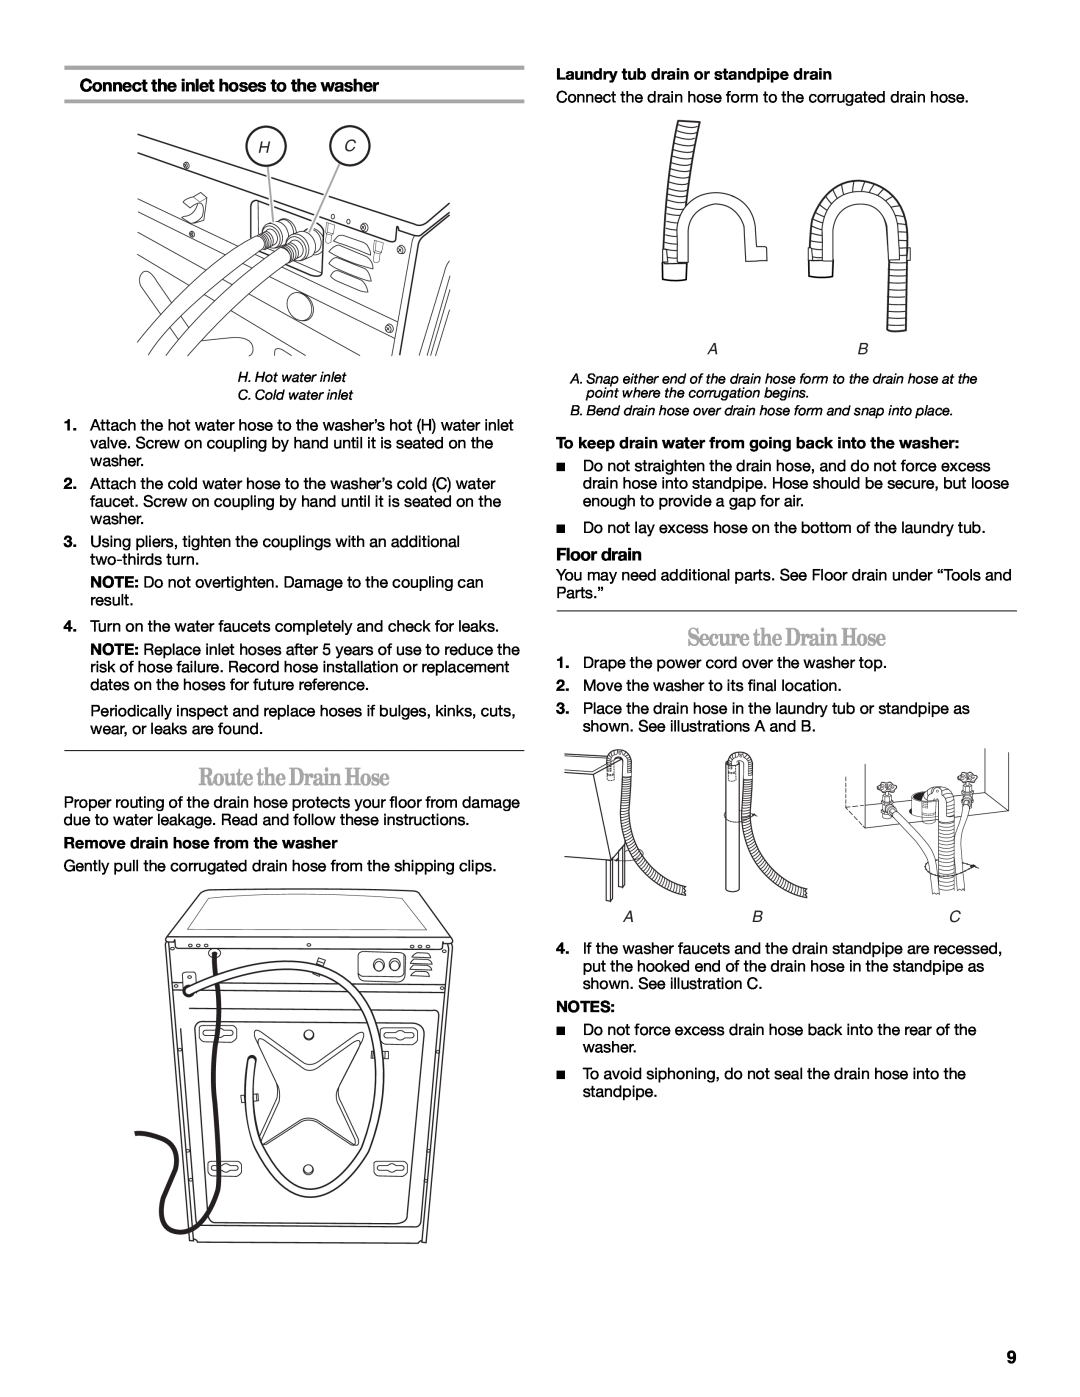 Whirlpool W10117768A manual SecuretheDrain Hose, RoutetheDrainHose, Connect the inlet hoses to the washer, Floor drain 